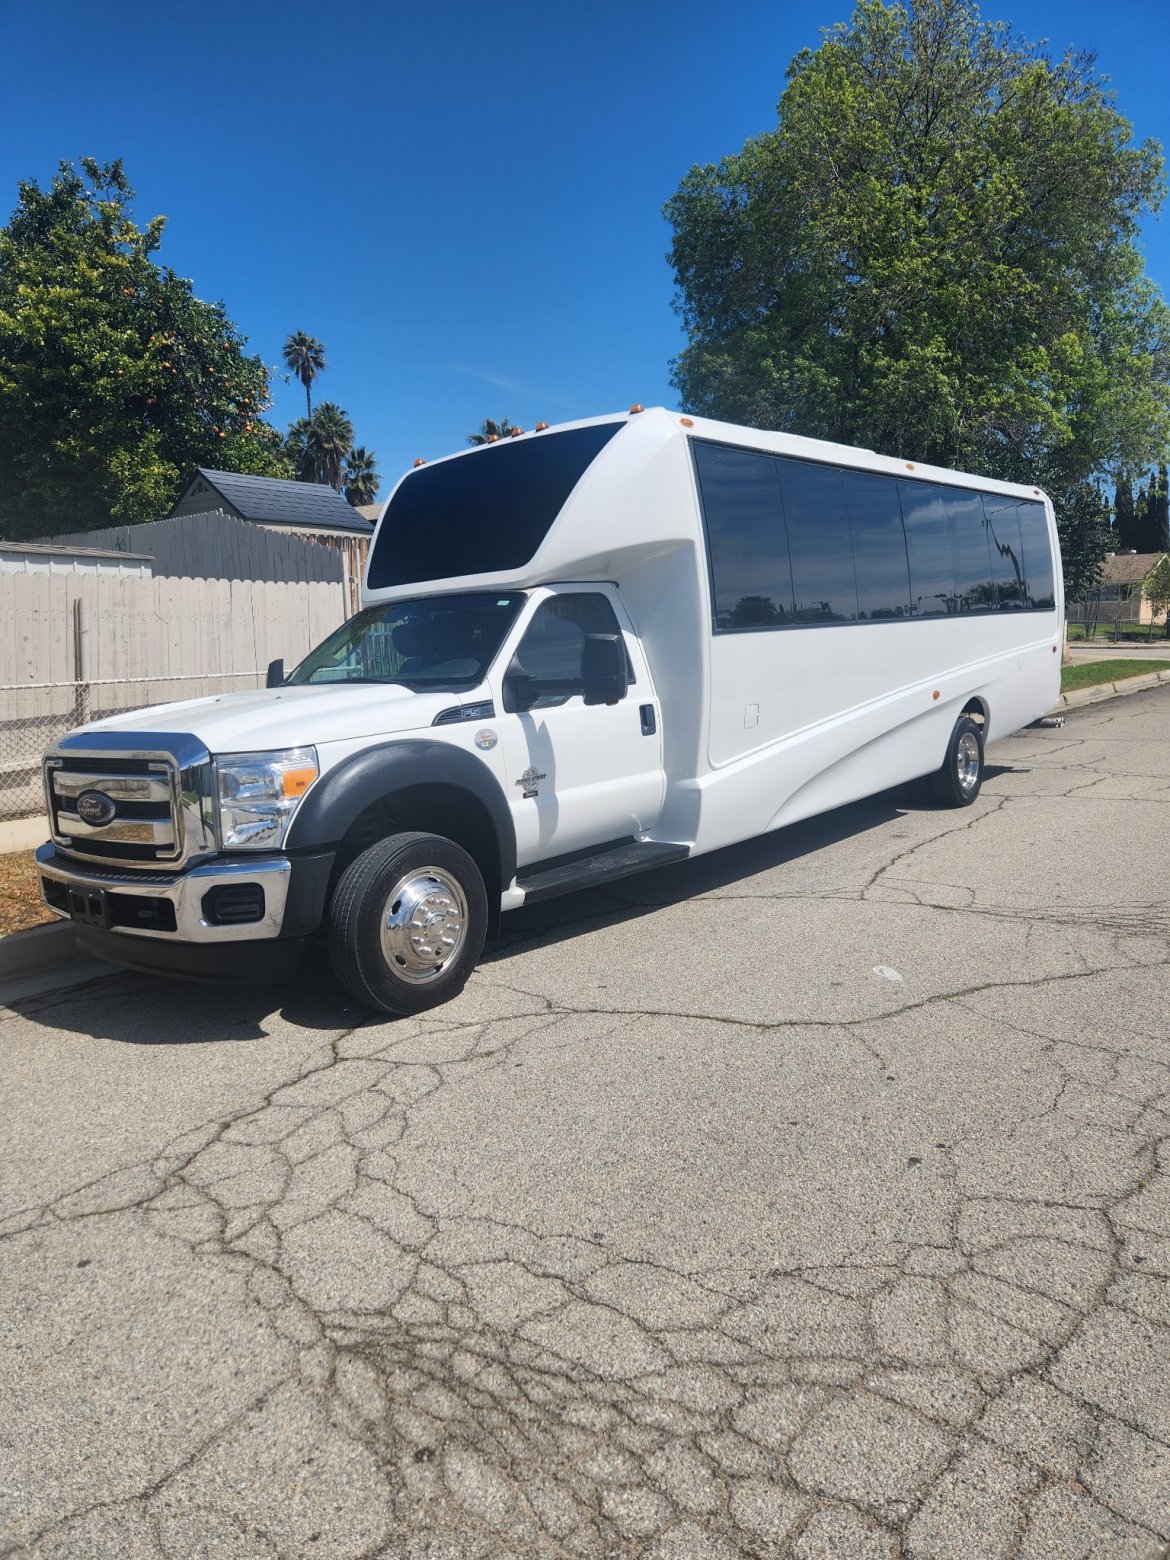 Shuttle Bus for sale: 2015 Ford F550 by Grech